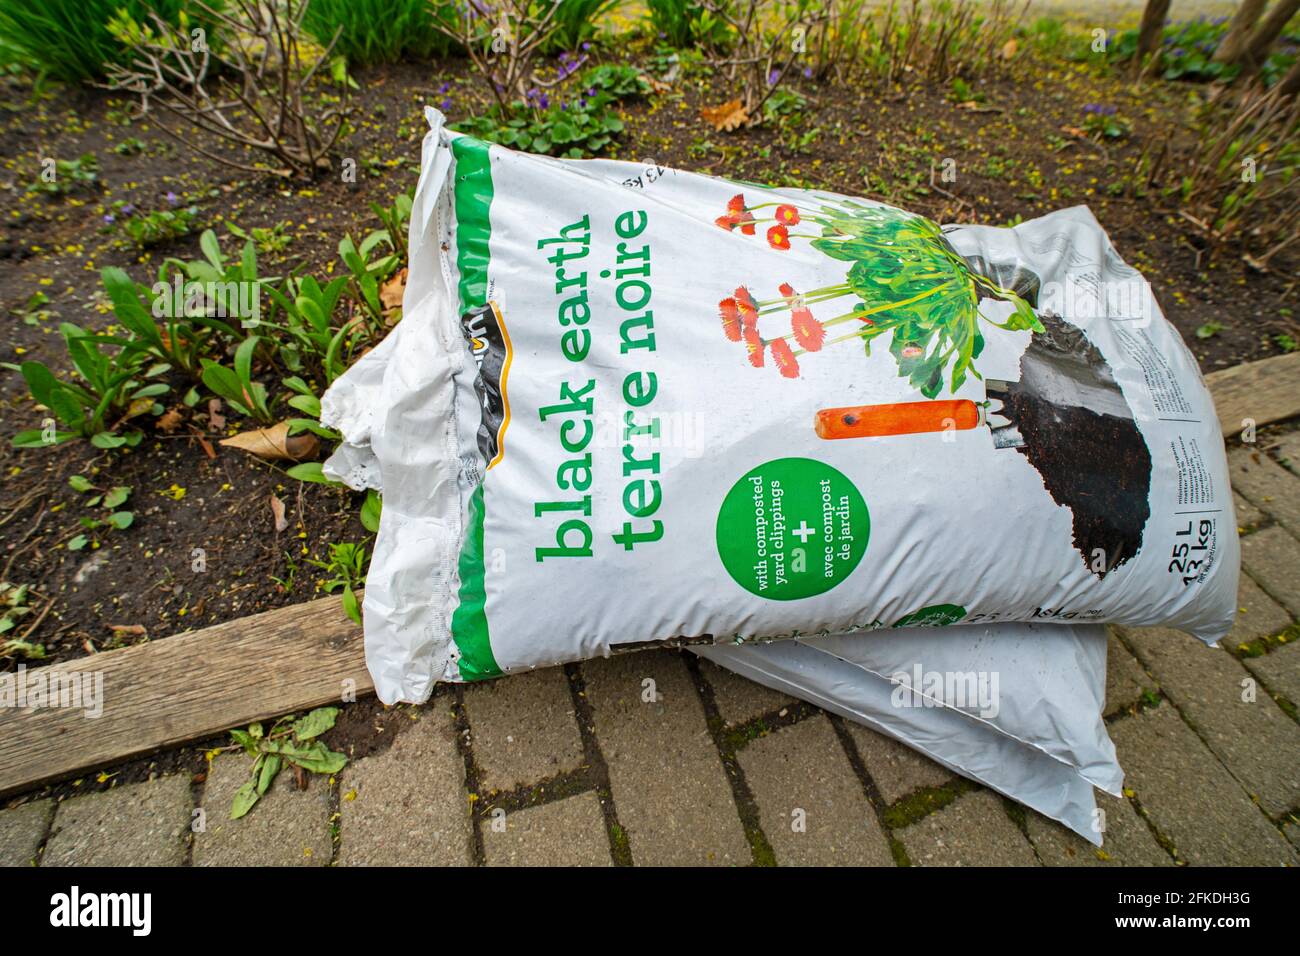 Bags of Gardening Soil, Black Soil, Soil, Earth for Garden, with composted yard clippings Stock Photo